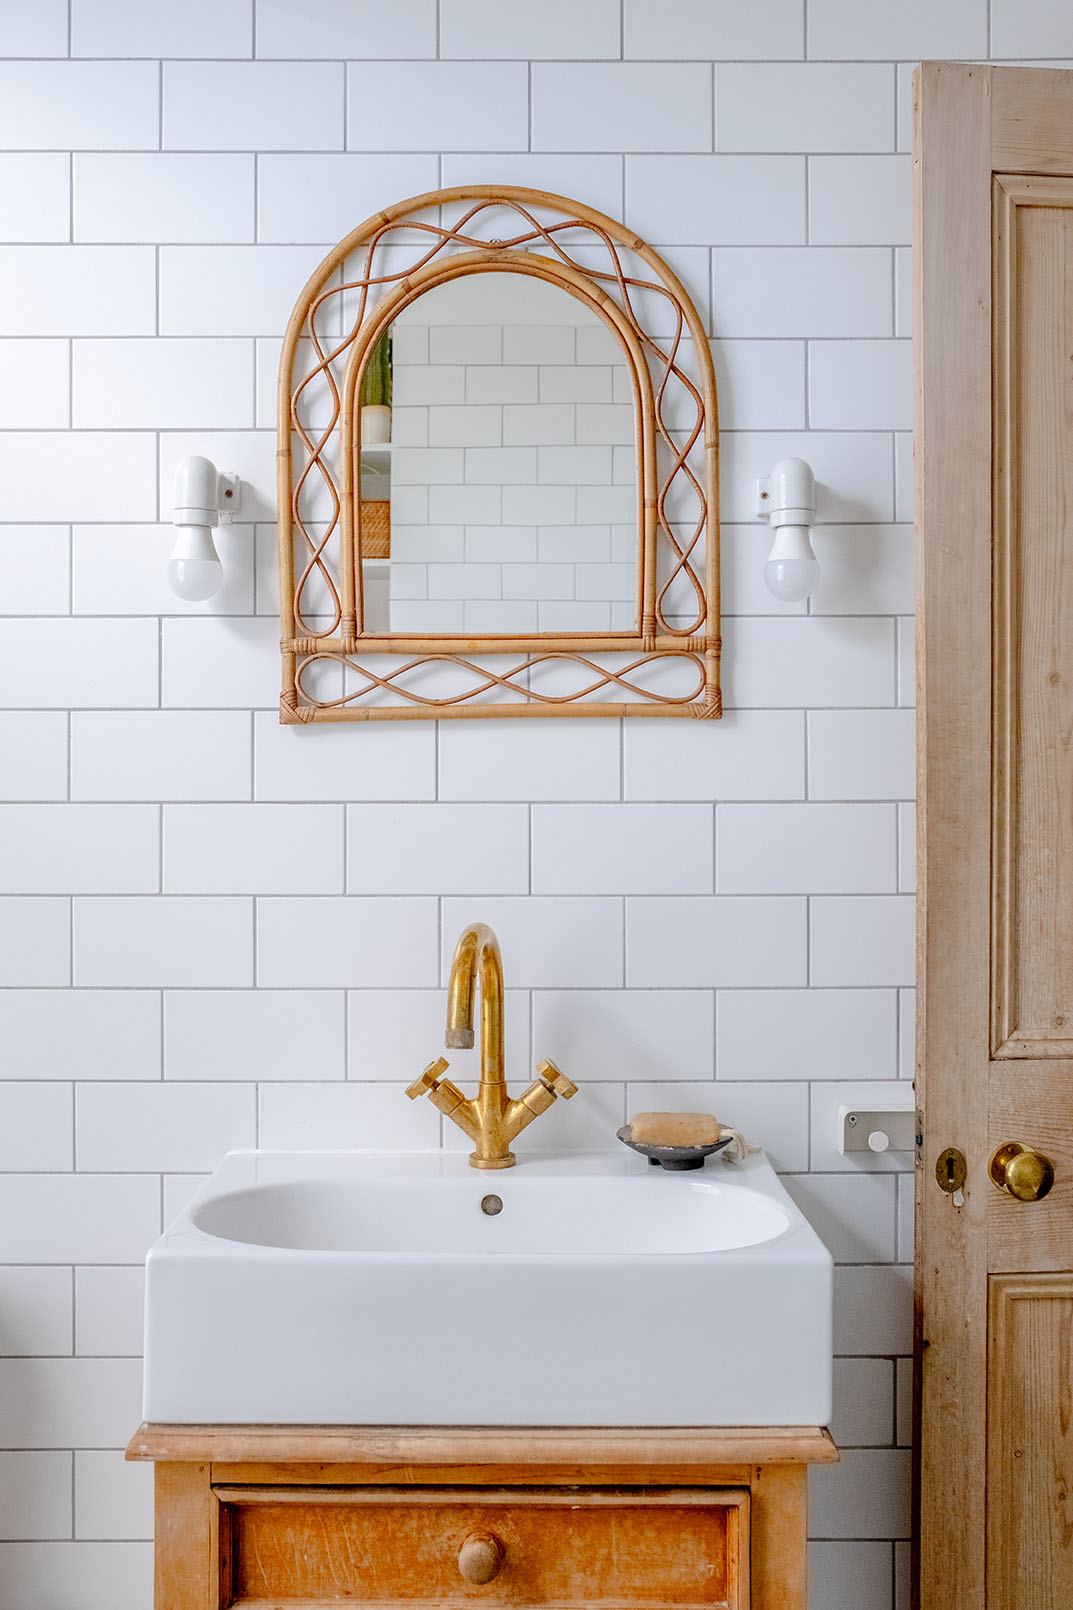 A detail of a bathroom mirror and sanity unit, white tiles on the wall, bronze gold coloured tap.